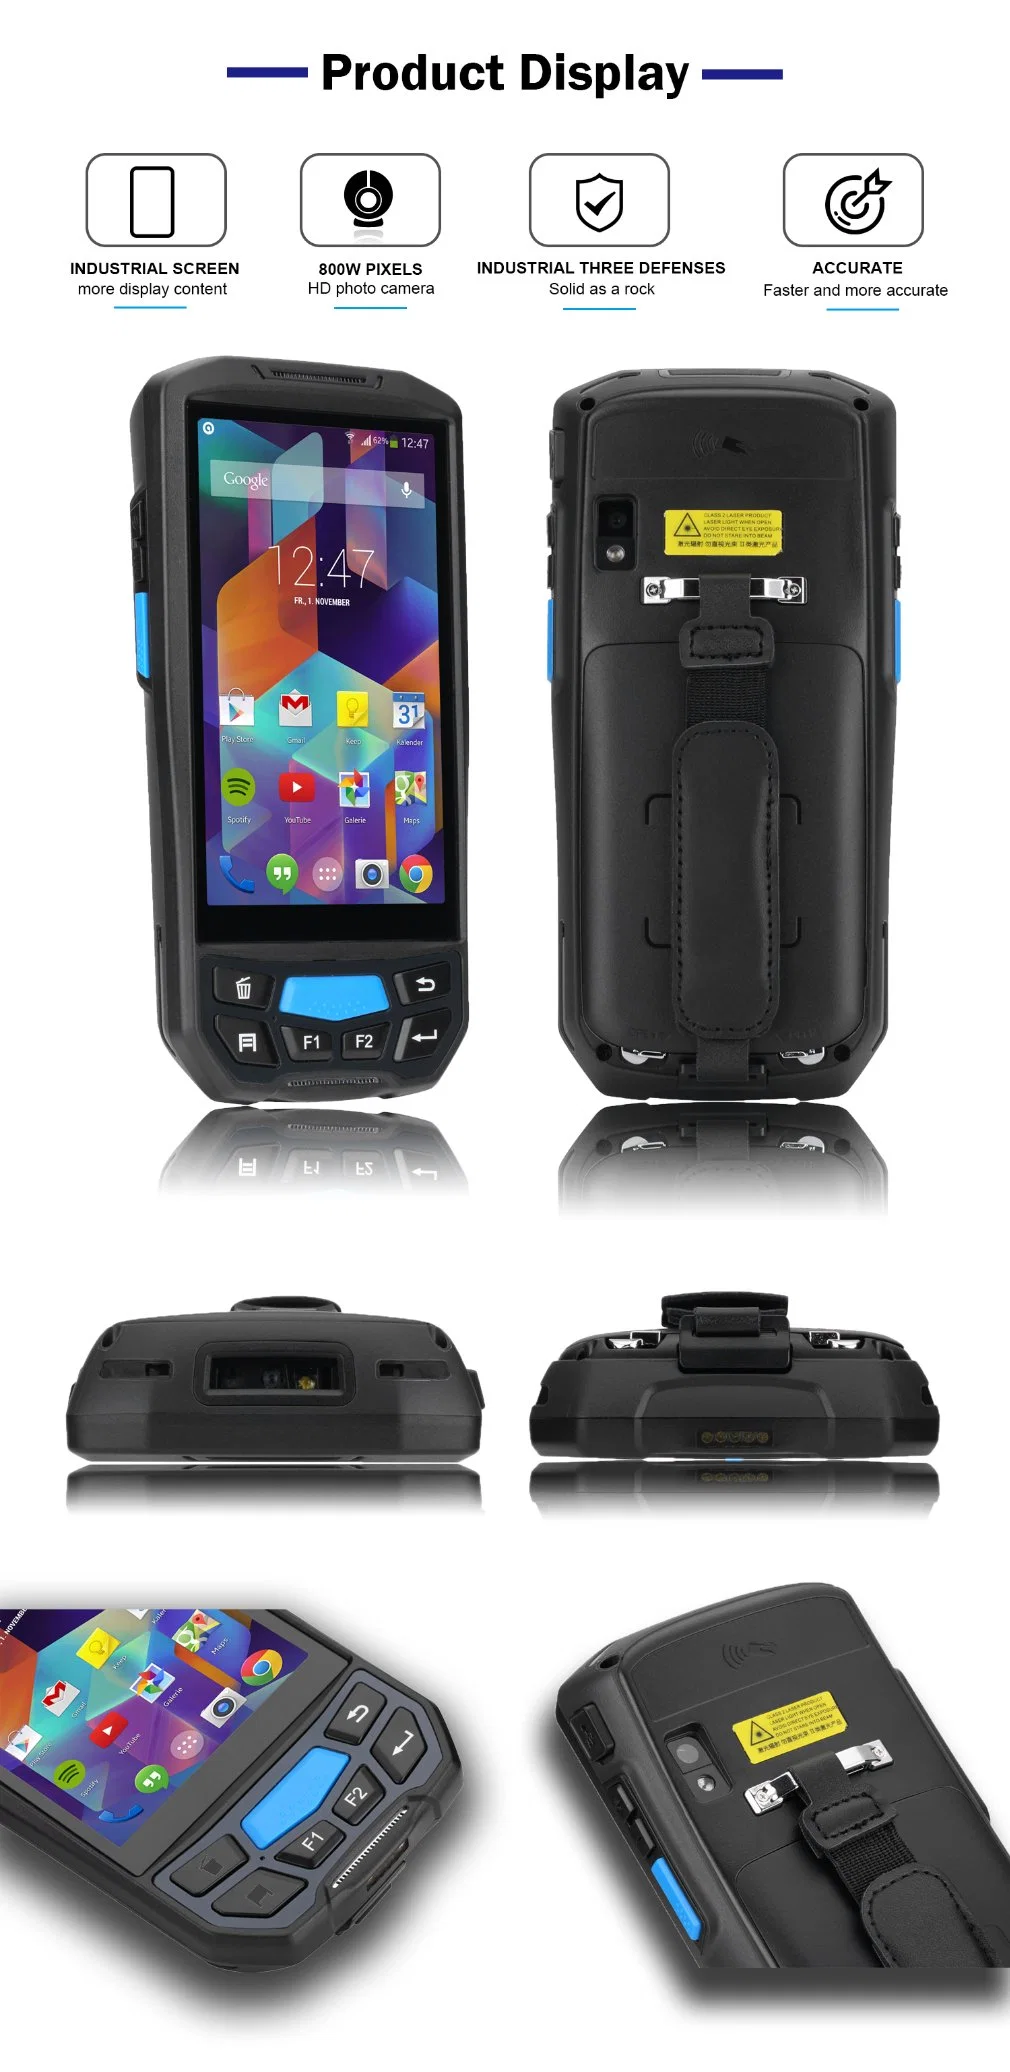 Wireless Portable Handheld PDA Laser 1d Android 2D Barcode Scanner